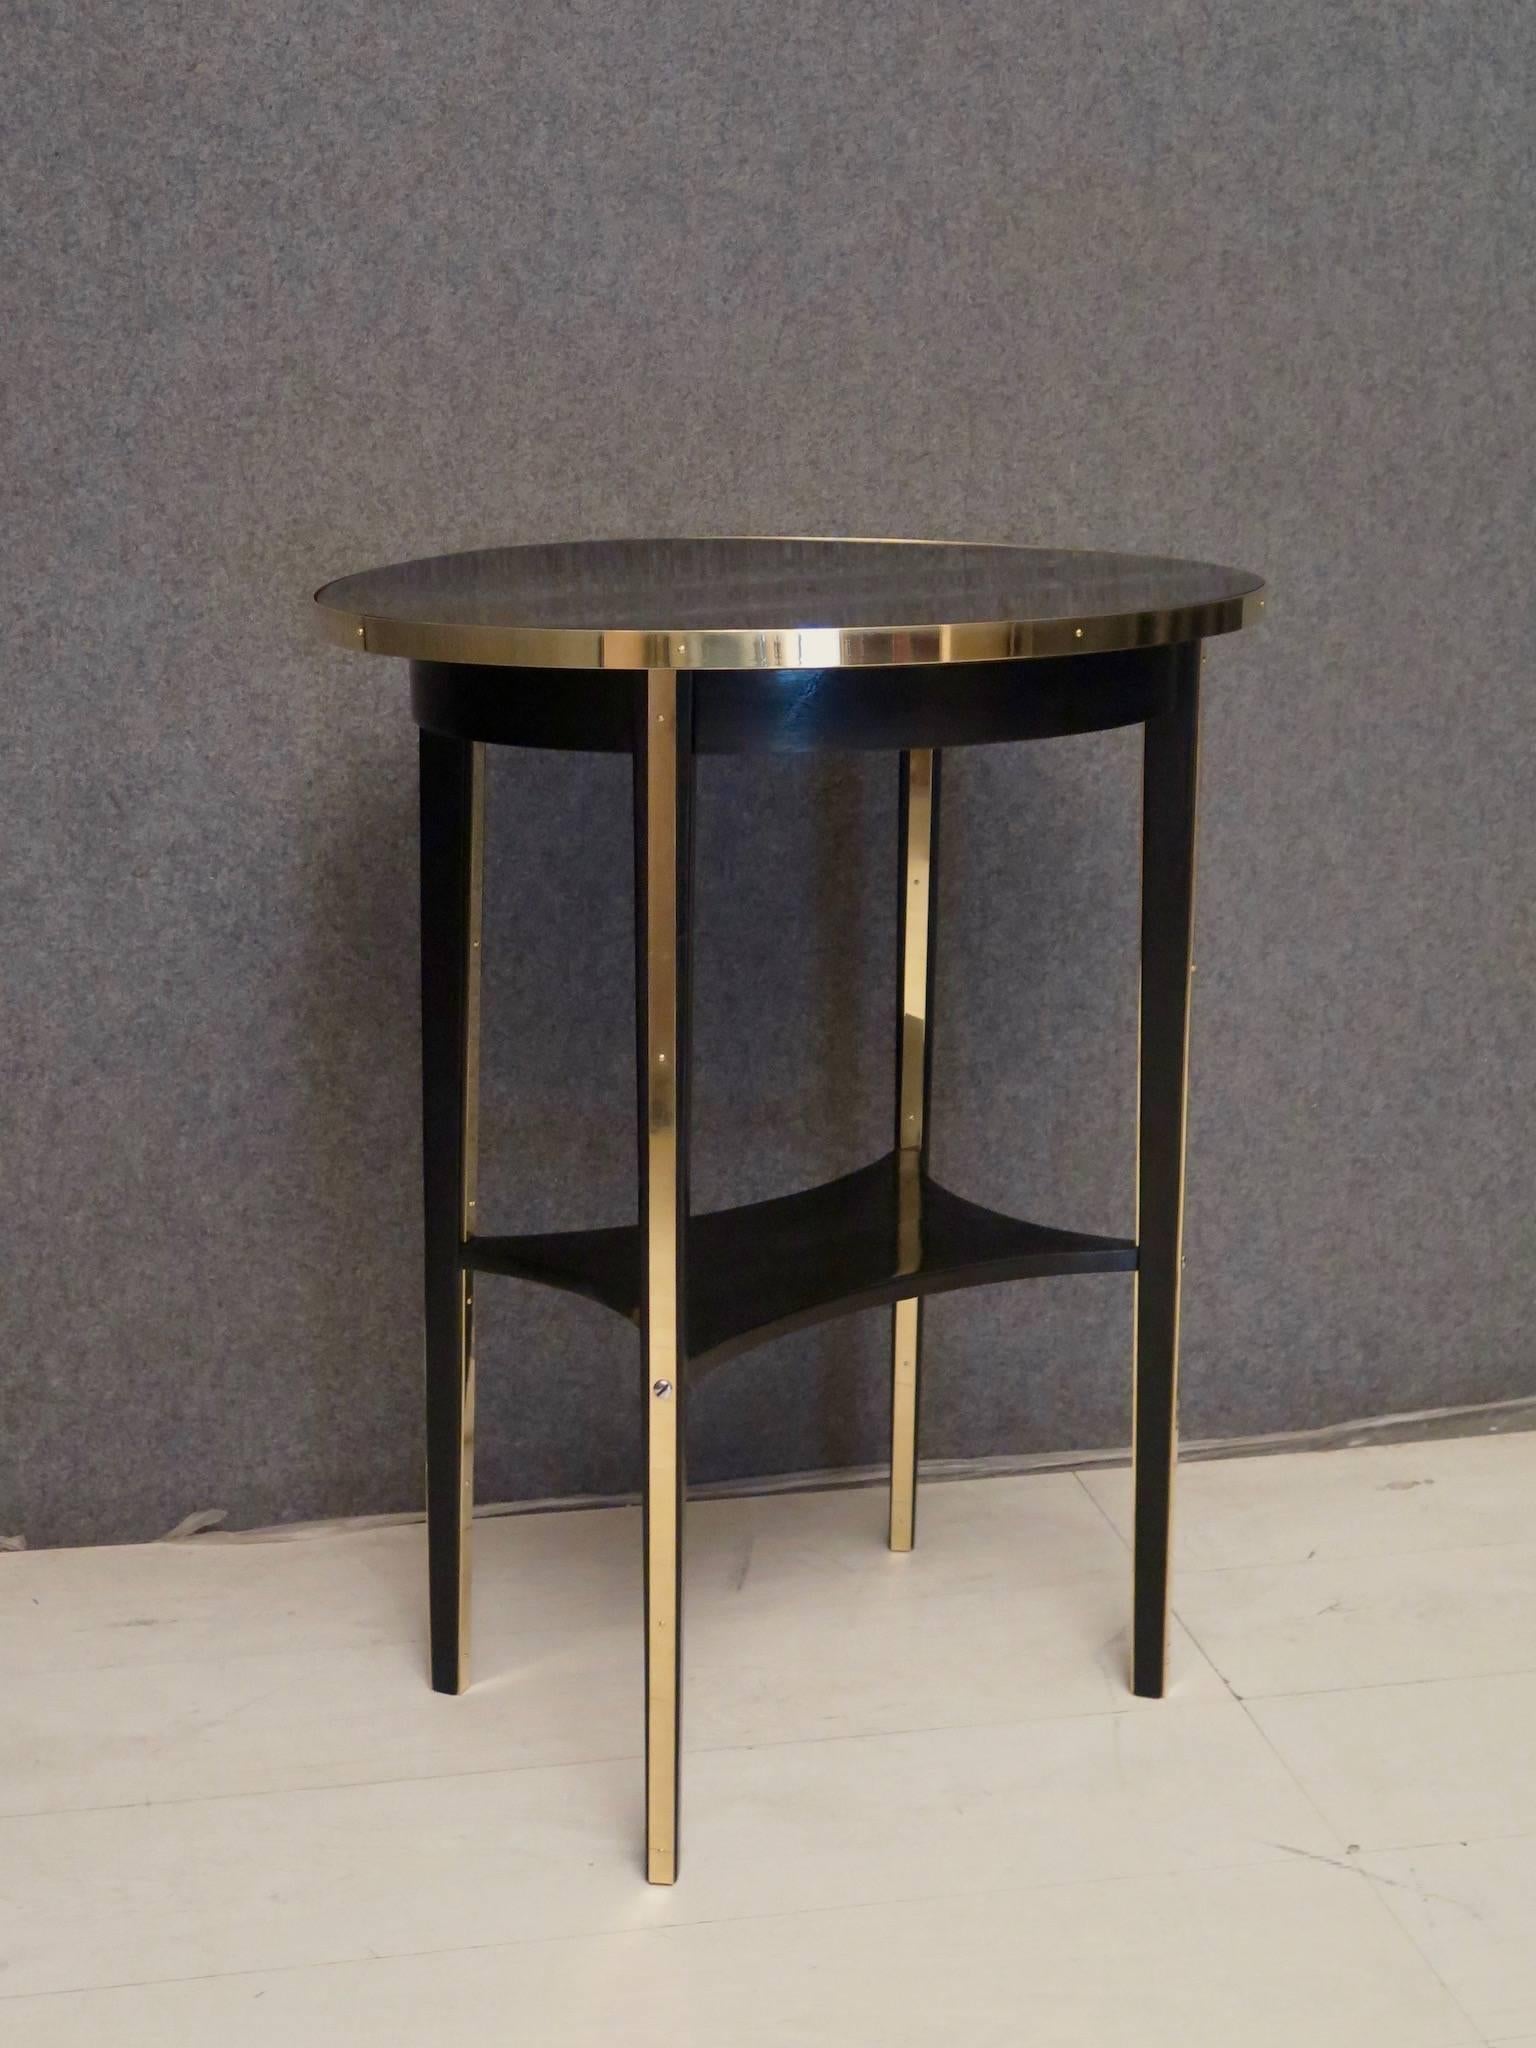 Clean and linear Thonet side table, original Austrian Art Nouveau.Embellished with a fantastic polished brass finish.

All in beechwood, polished in black shellac with brass inserts. Formed by an oval top, bordered by a brass flat, held by brass